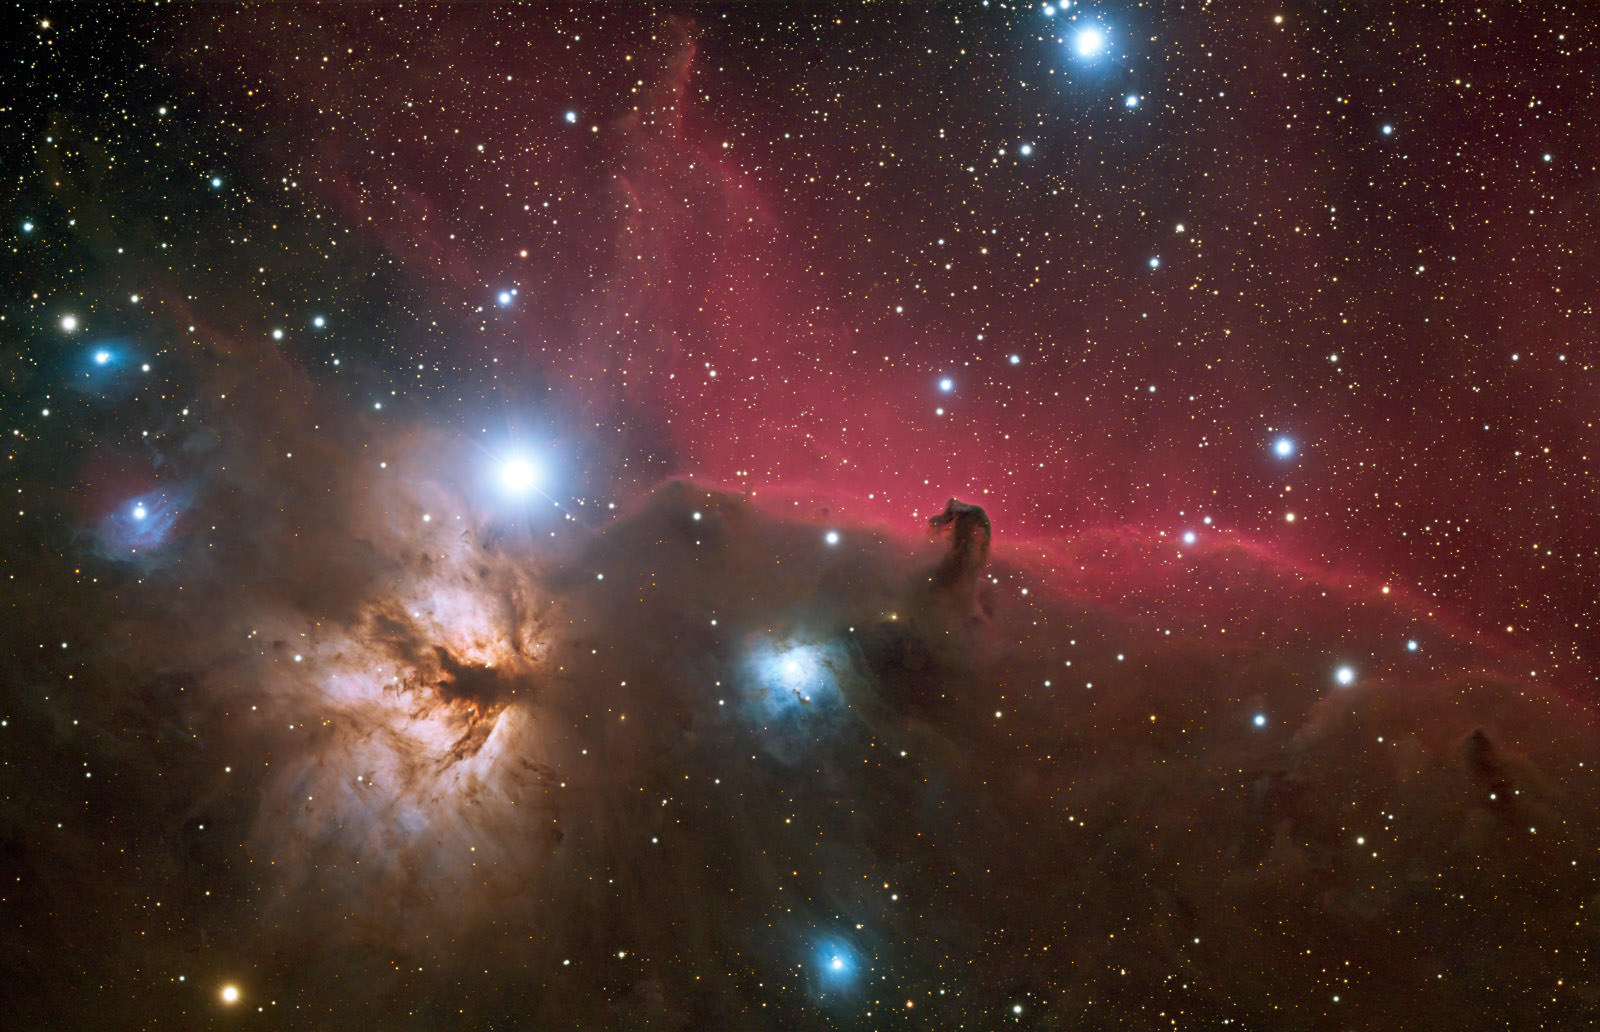 best telescope for astrophotography 2015